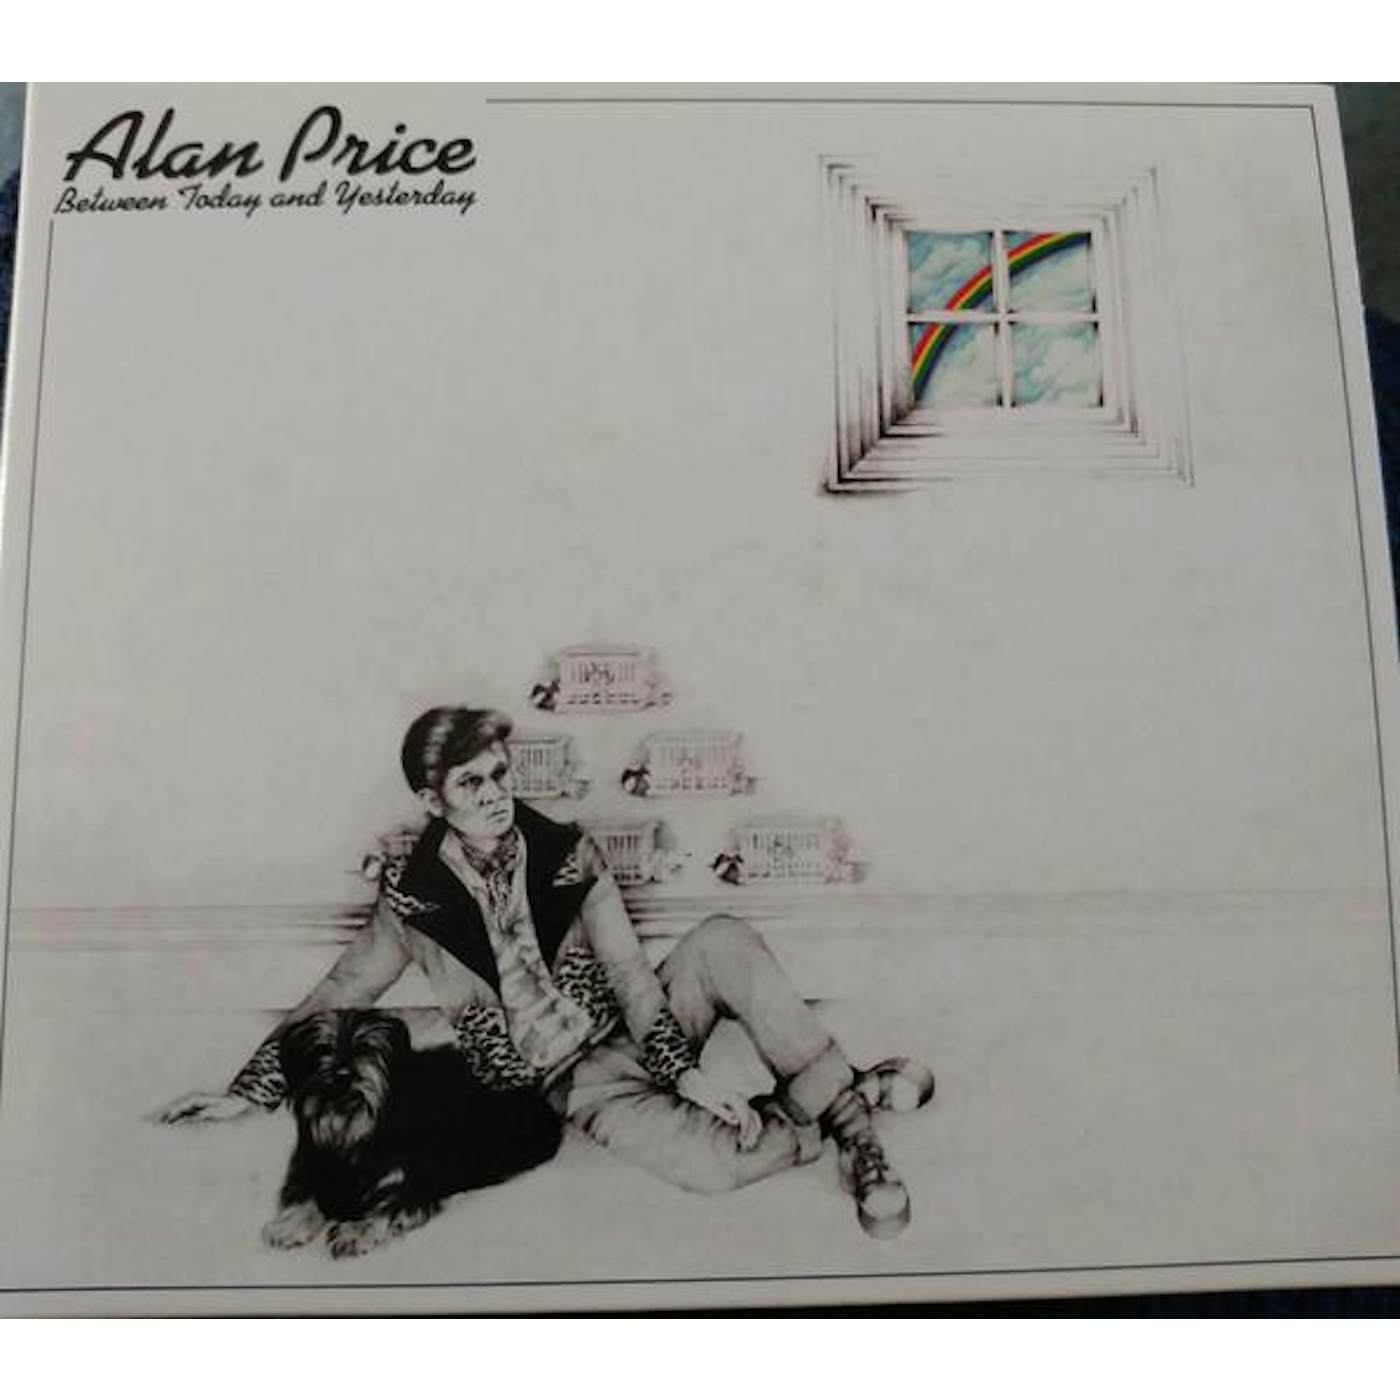 Alan Price BETWEEN TODAY & YESTERDAY: REMASTERED & EXPANDED EDITION CD